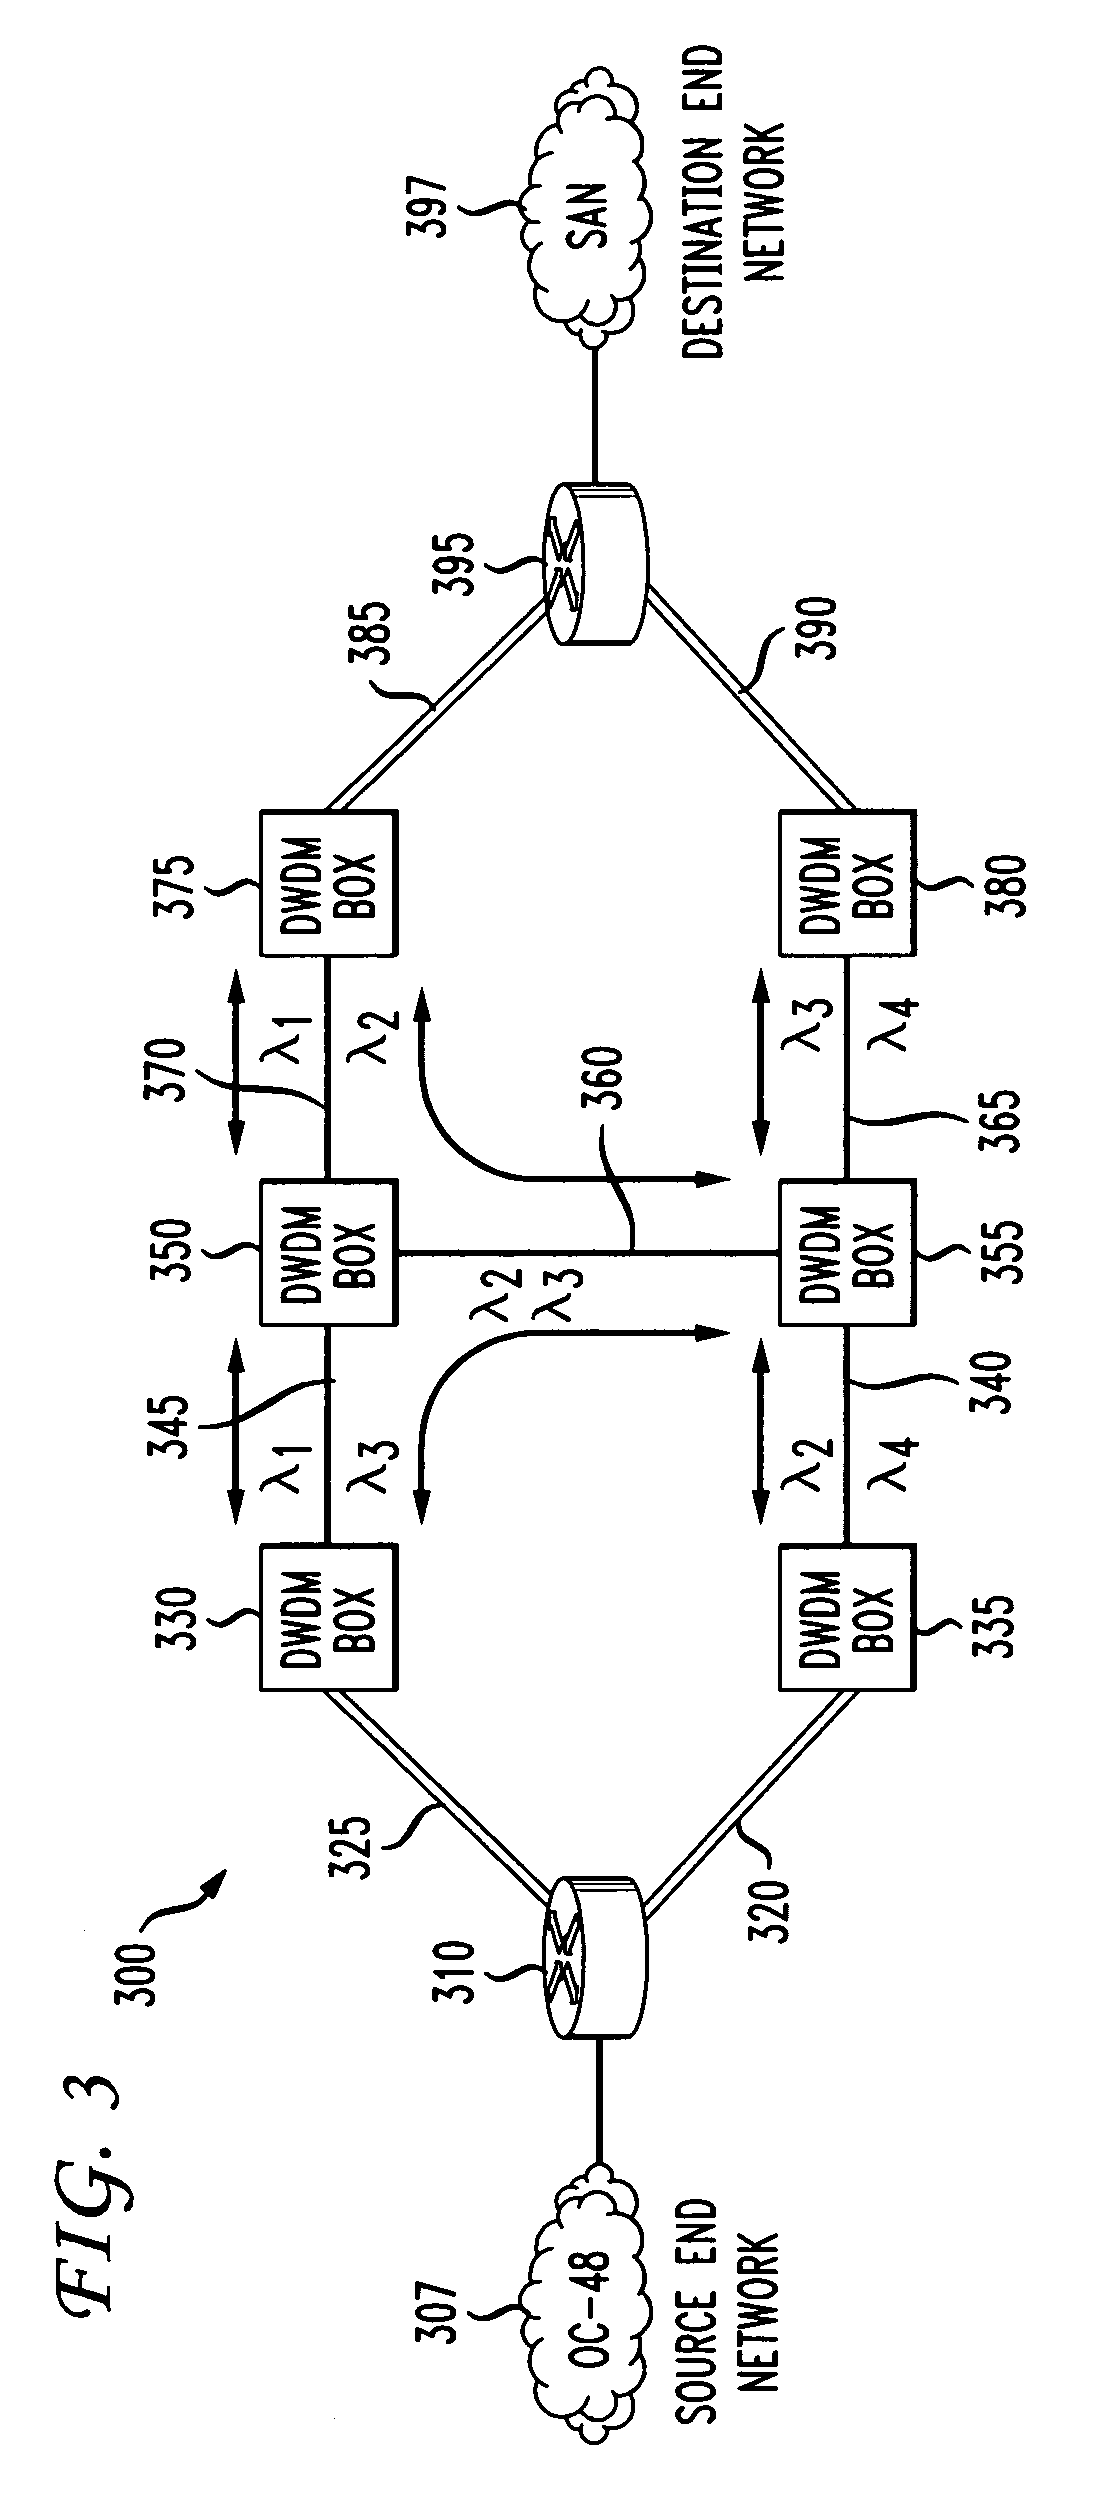 Method and system for long haul optical transport for applications sensitive to data flow interruption